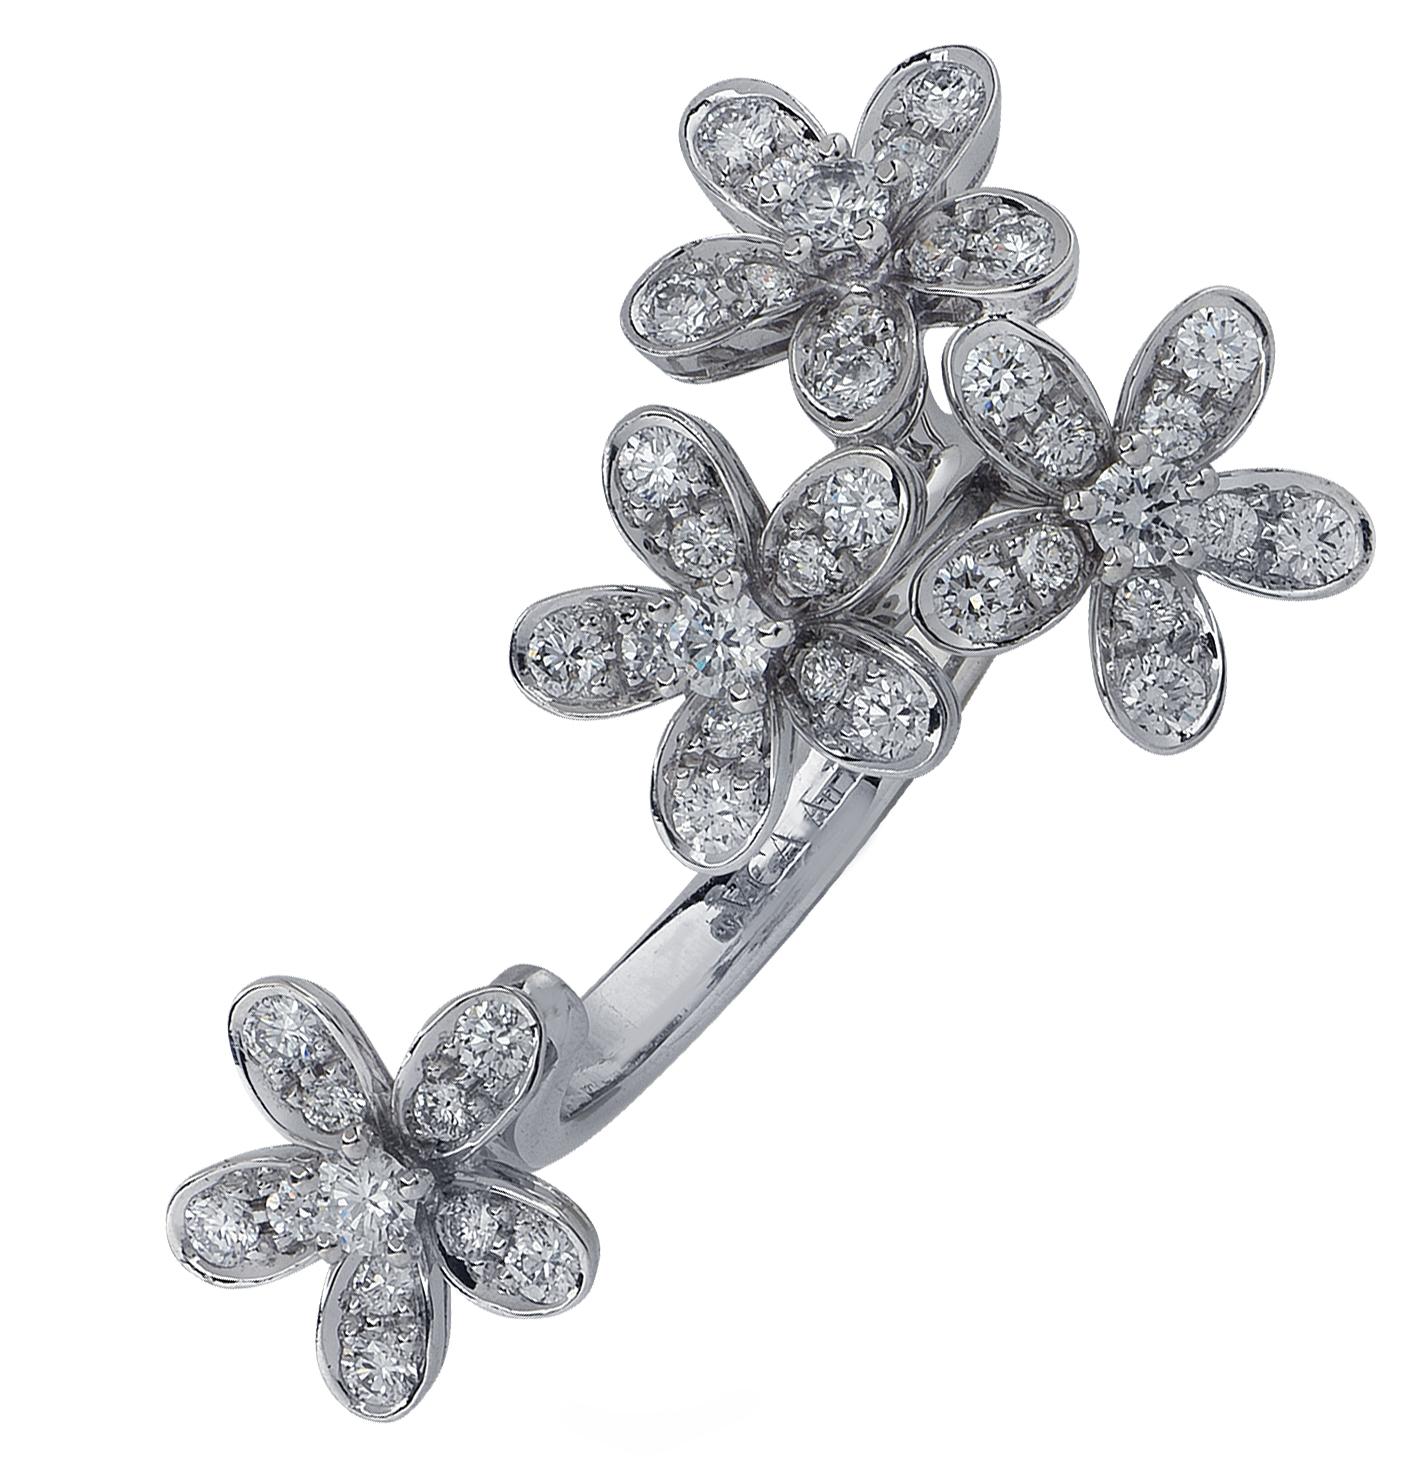 From the House of Van Cleef & Arpels, this exquisite Socrate Between the Finger ring, is finely handmade in 18 Karat white gold. Four diamond encrusted flowers are daintily arranged, capturing the unparalleled beauty of nature. This stunning piece